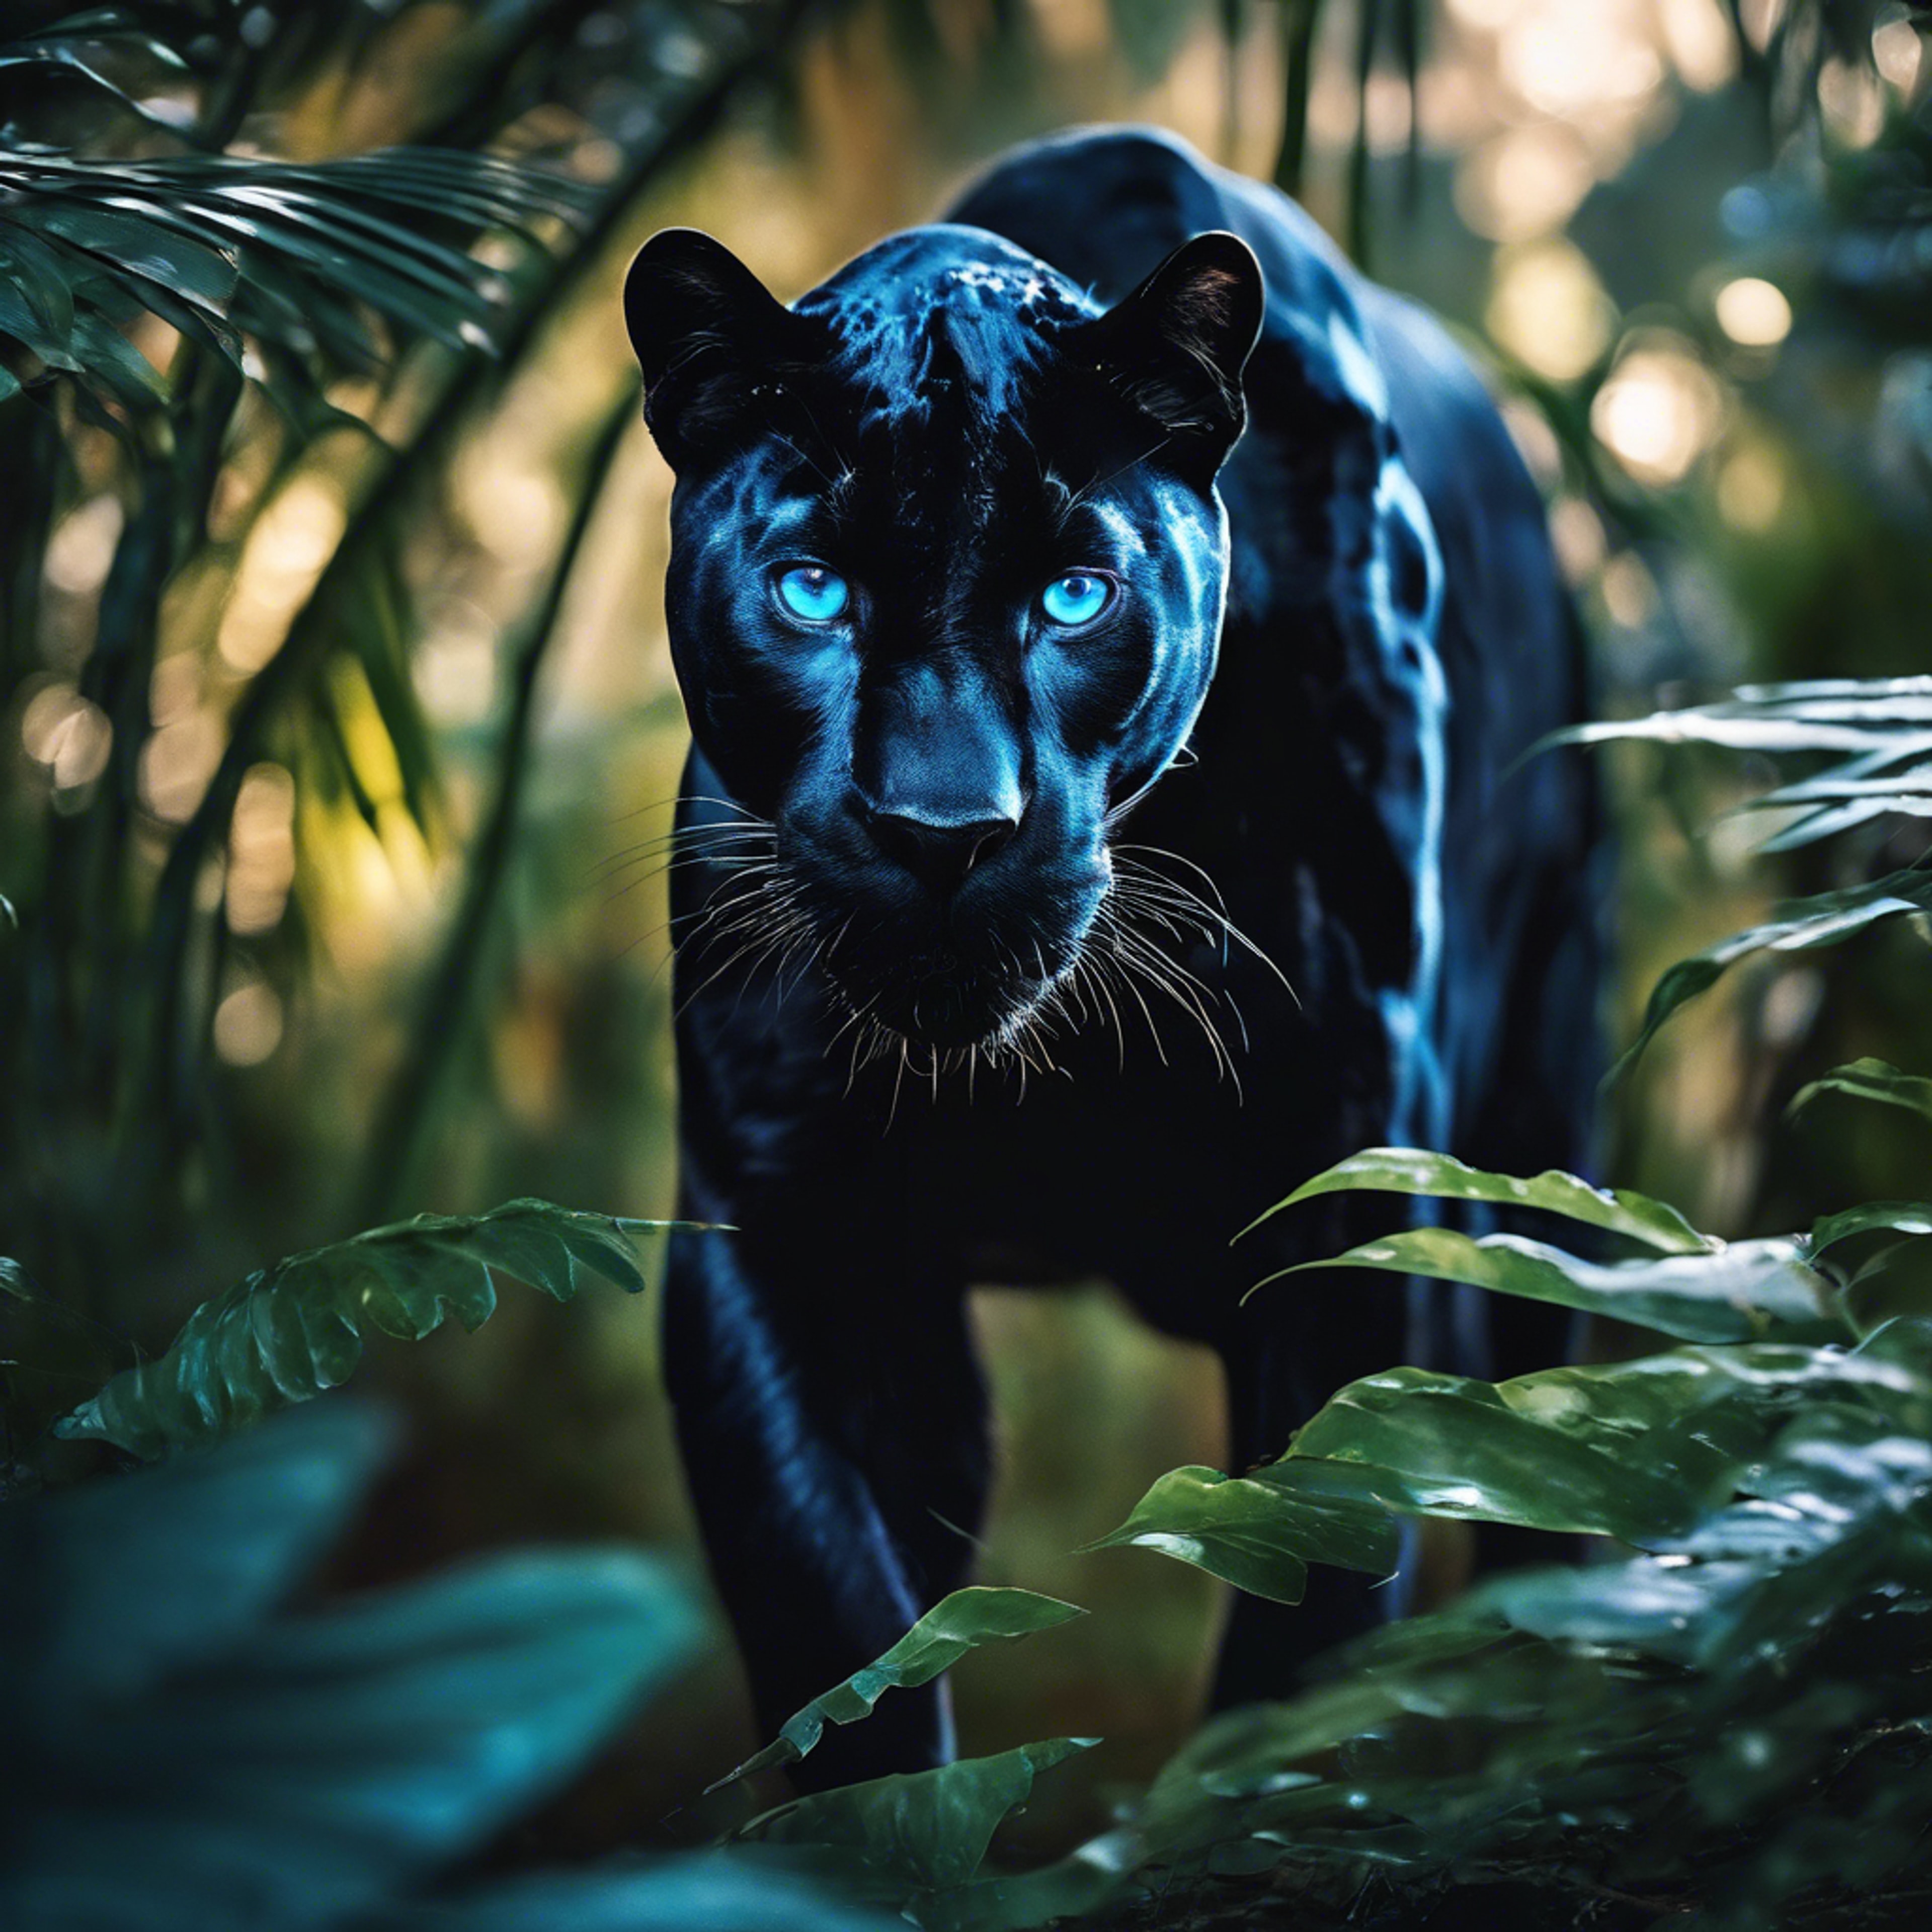 A midnight black panther with electric-blue eyes prowling in a moonlit jungle. Wallpaper[eb354cc6a19348d1a314]